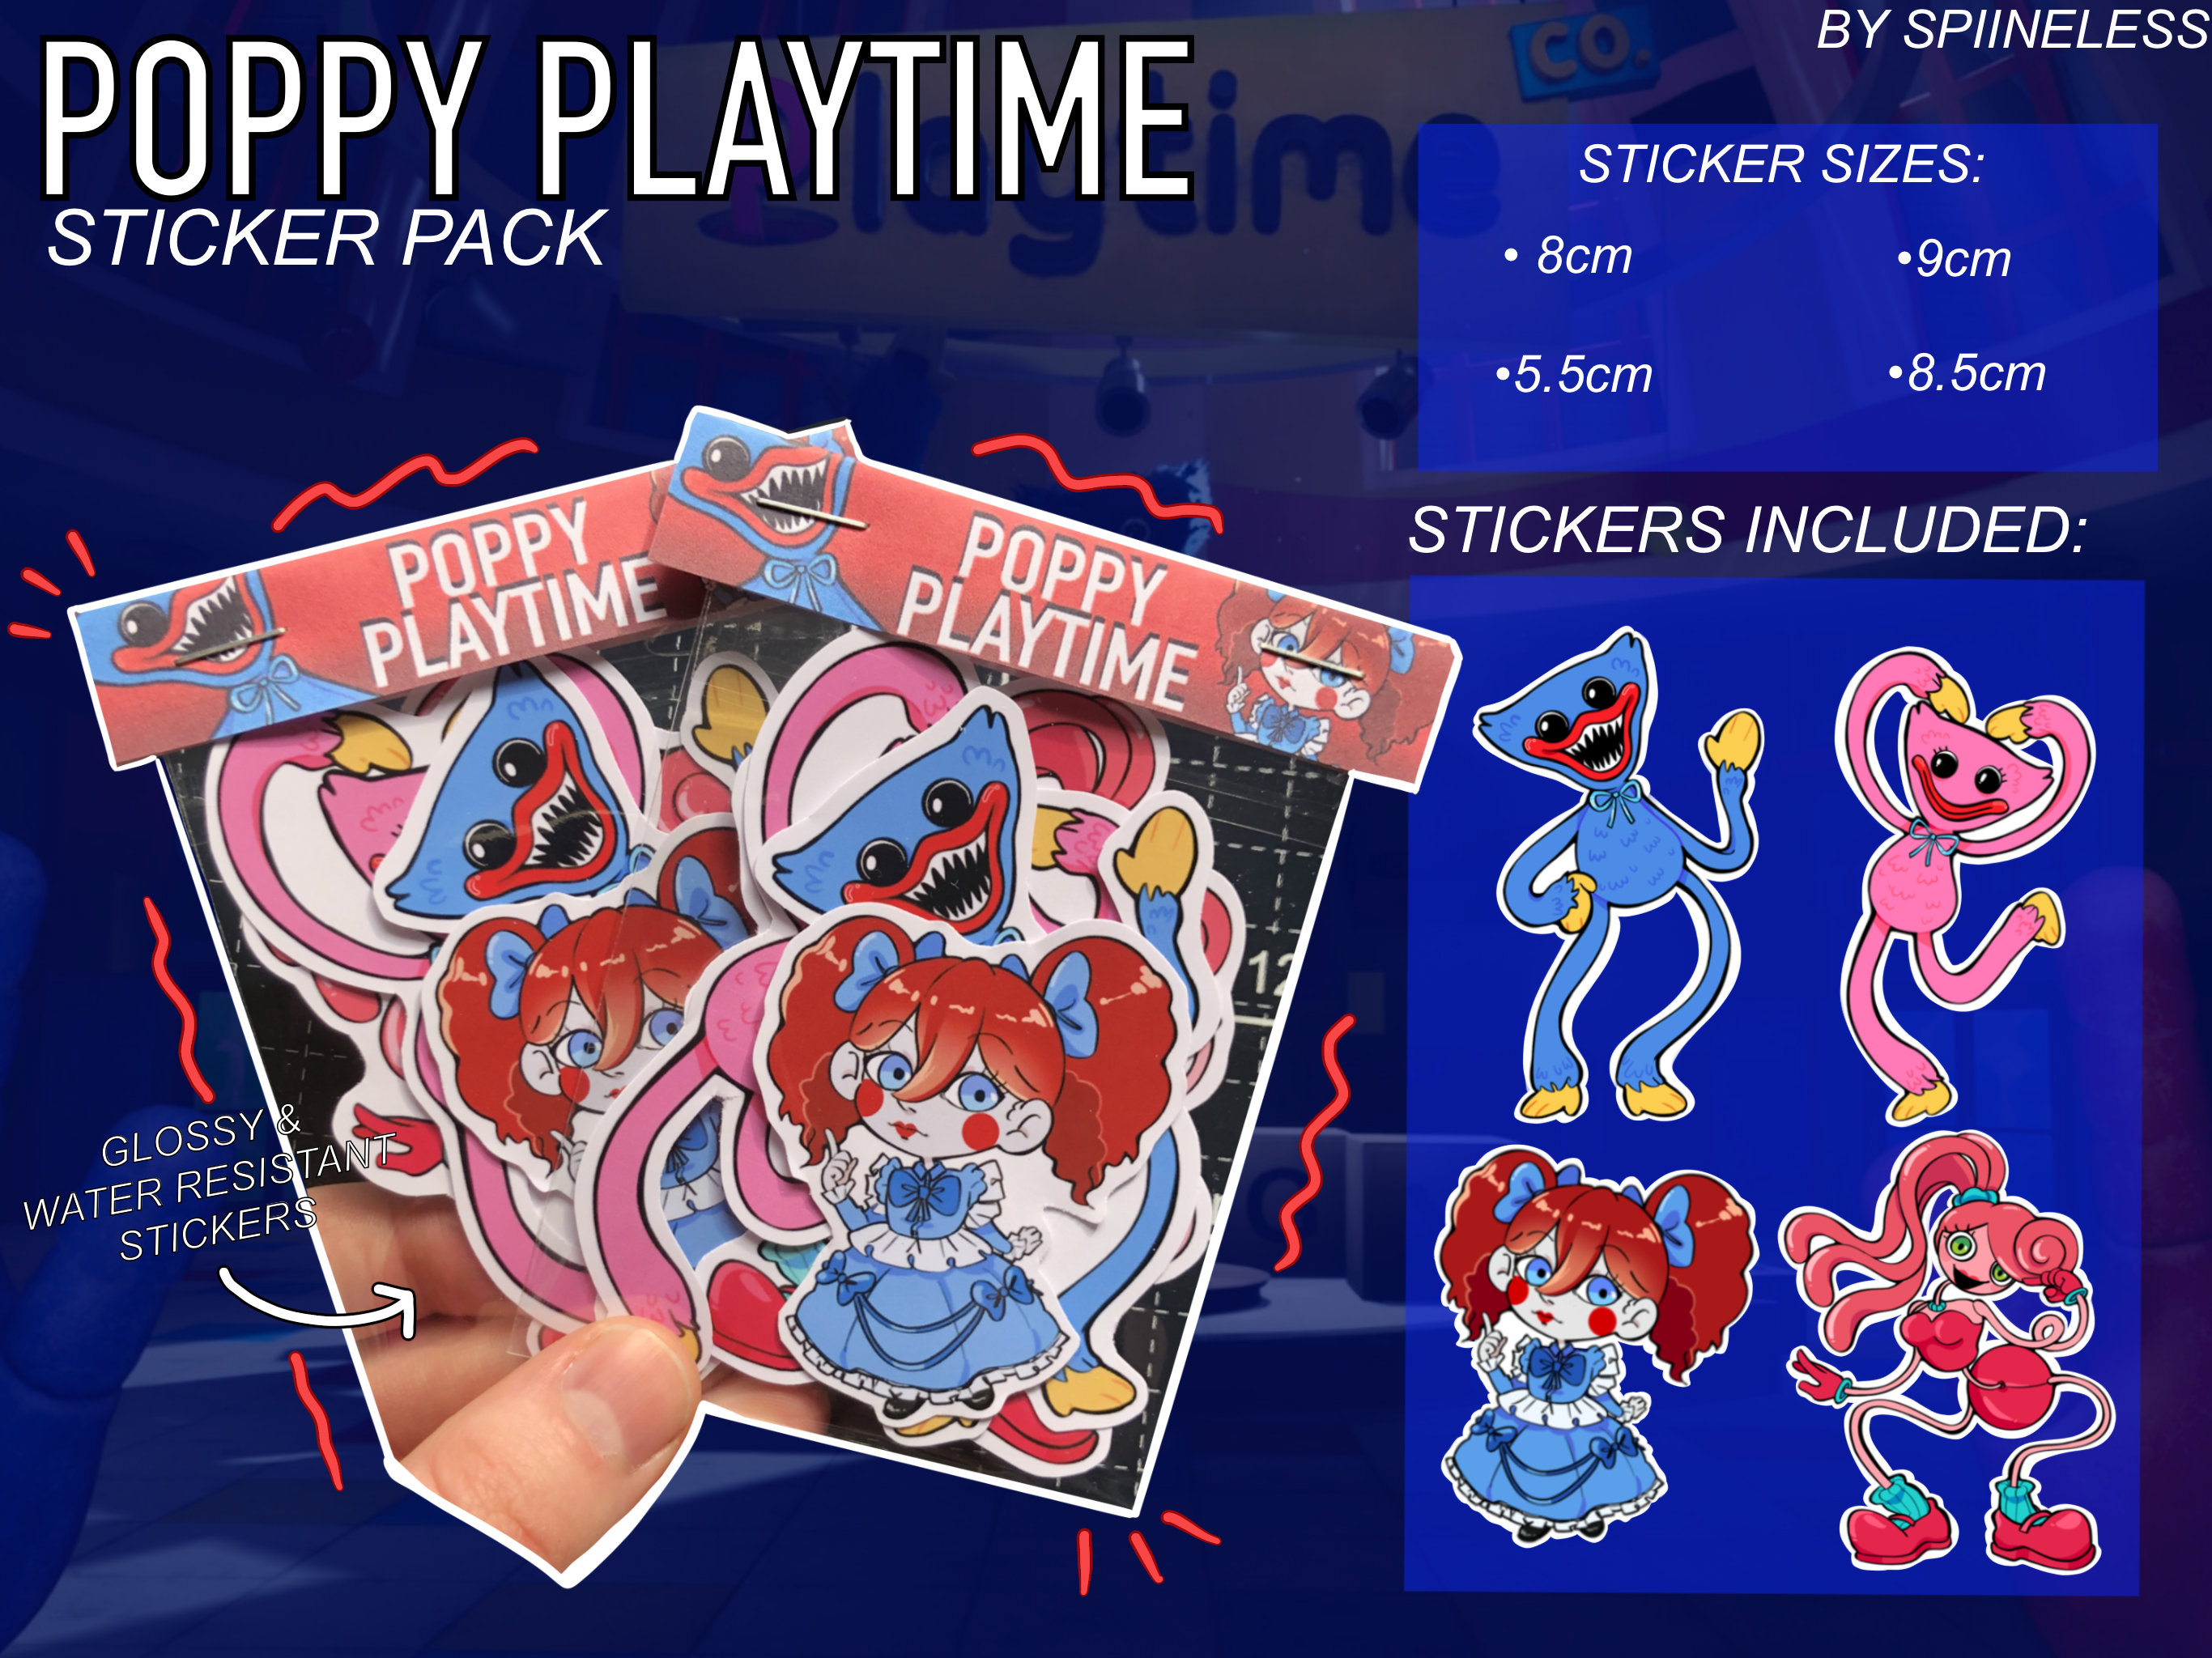 NEW GRAB PACK 2.0 FROM POPPY PLAYTIME CHAPTER 2 (MOST POWERFUL